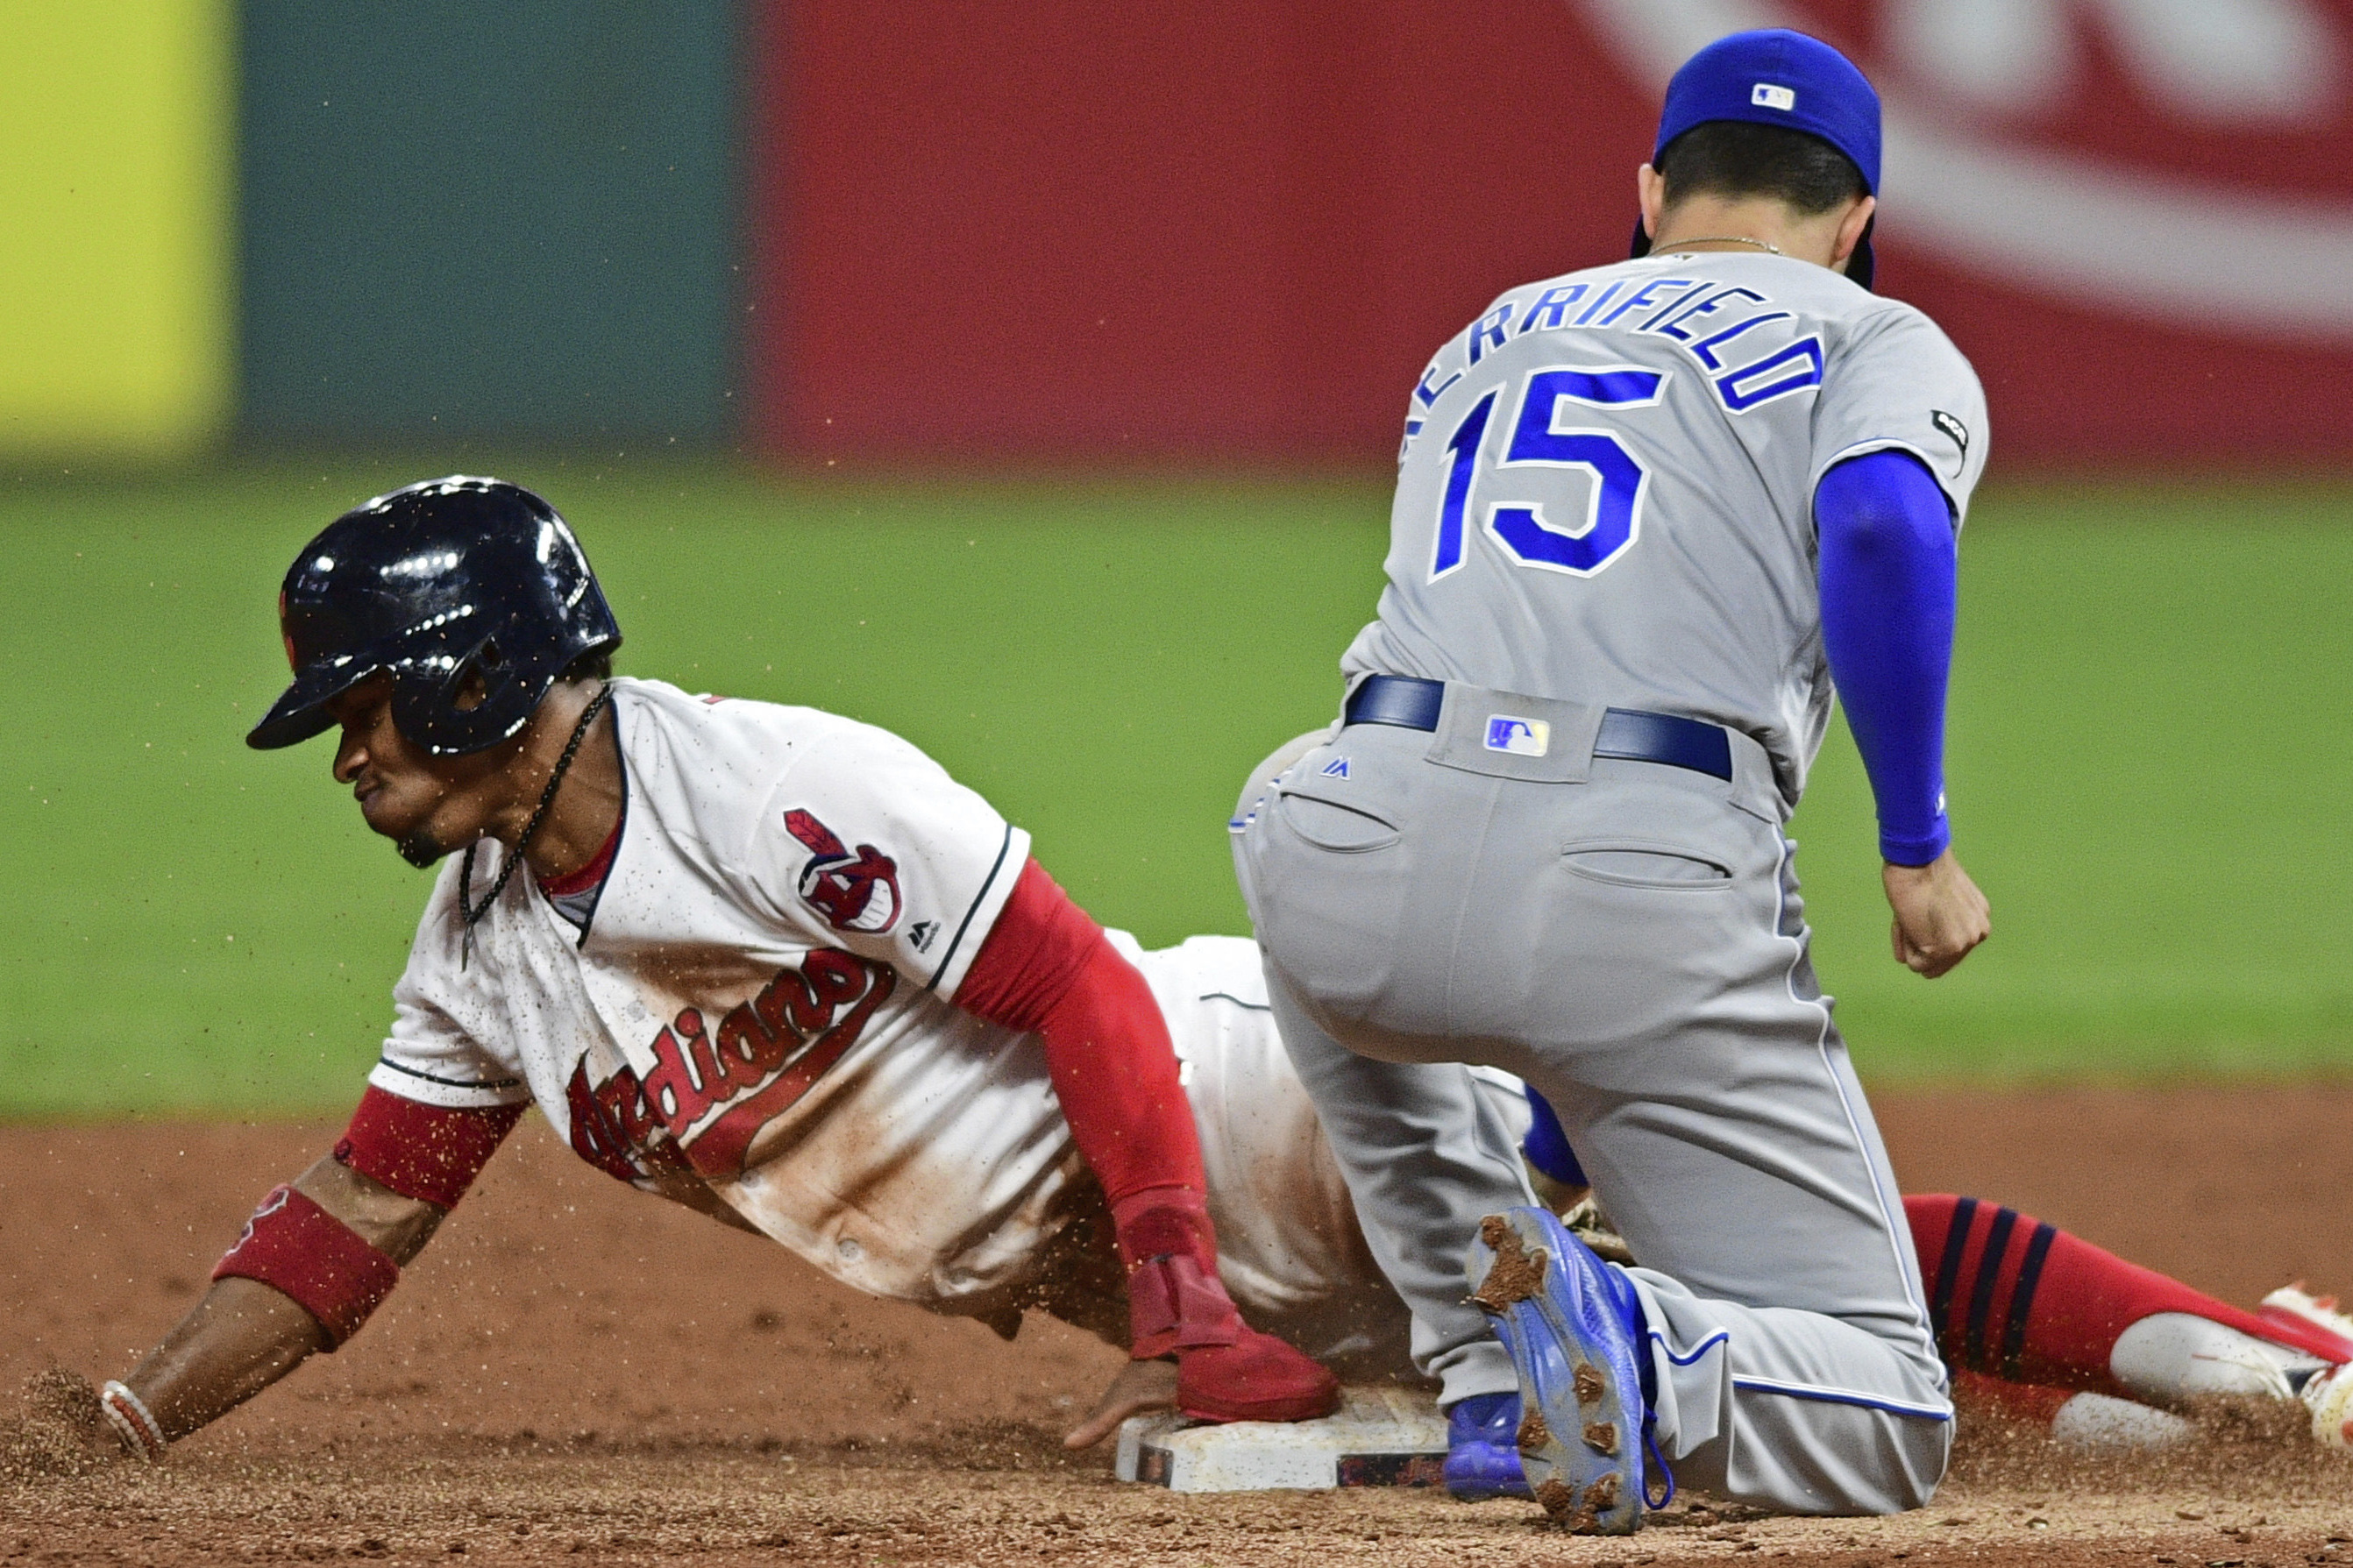 The Cleveland Indians' 22-Game Win Streak Is Ended by the Royals